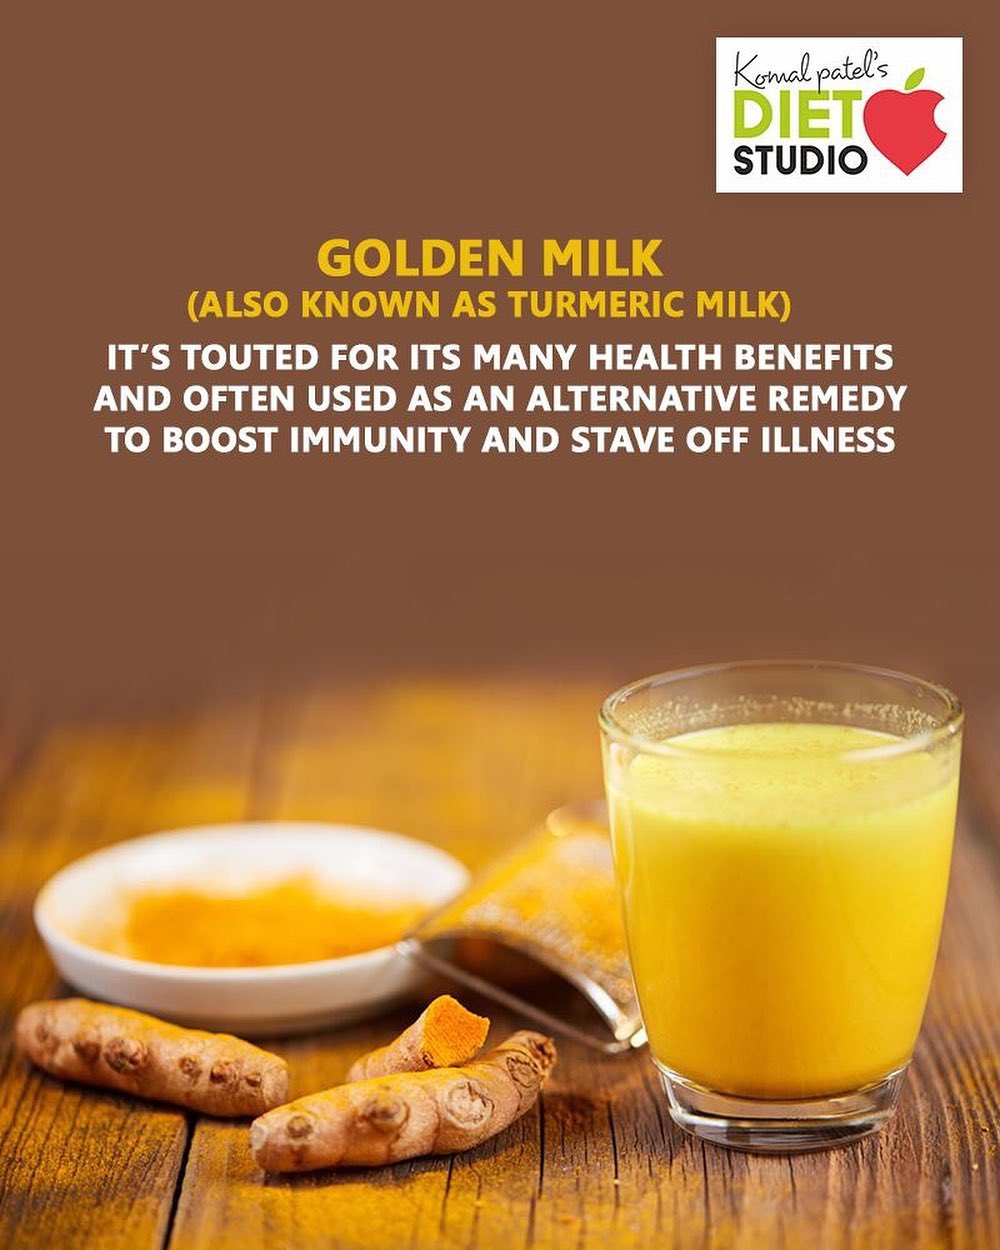 Golden milk — also known as turmeric milk

It’s touted for its many health benefits and often used as an alternative remedy to boost immunity and stave off illness.

#komalpatel #diet #goodfood #eathealthy #goodhealth